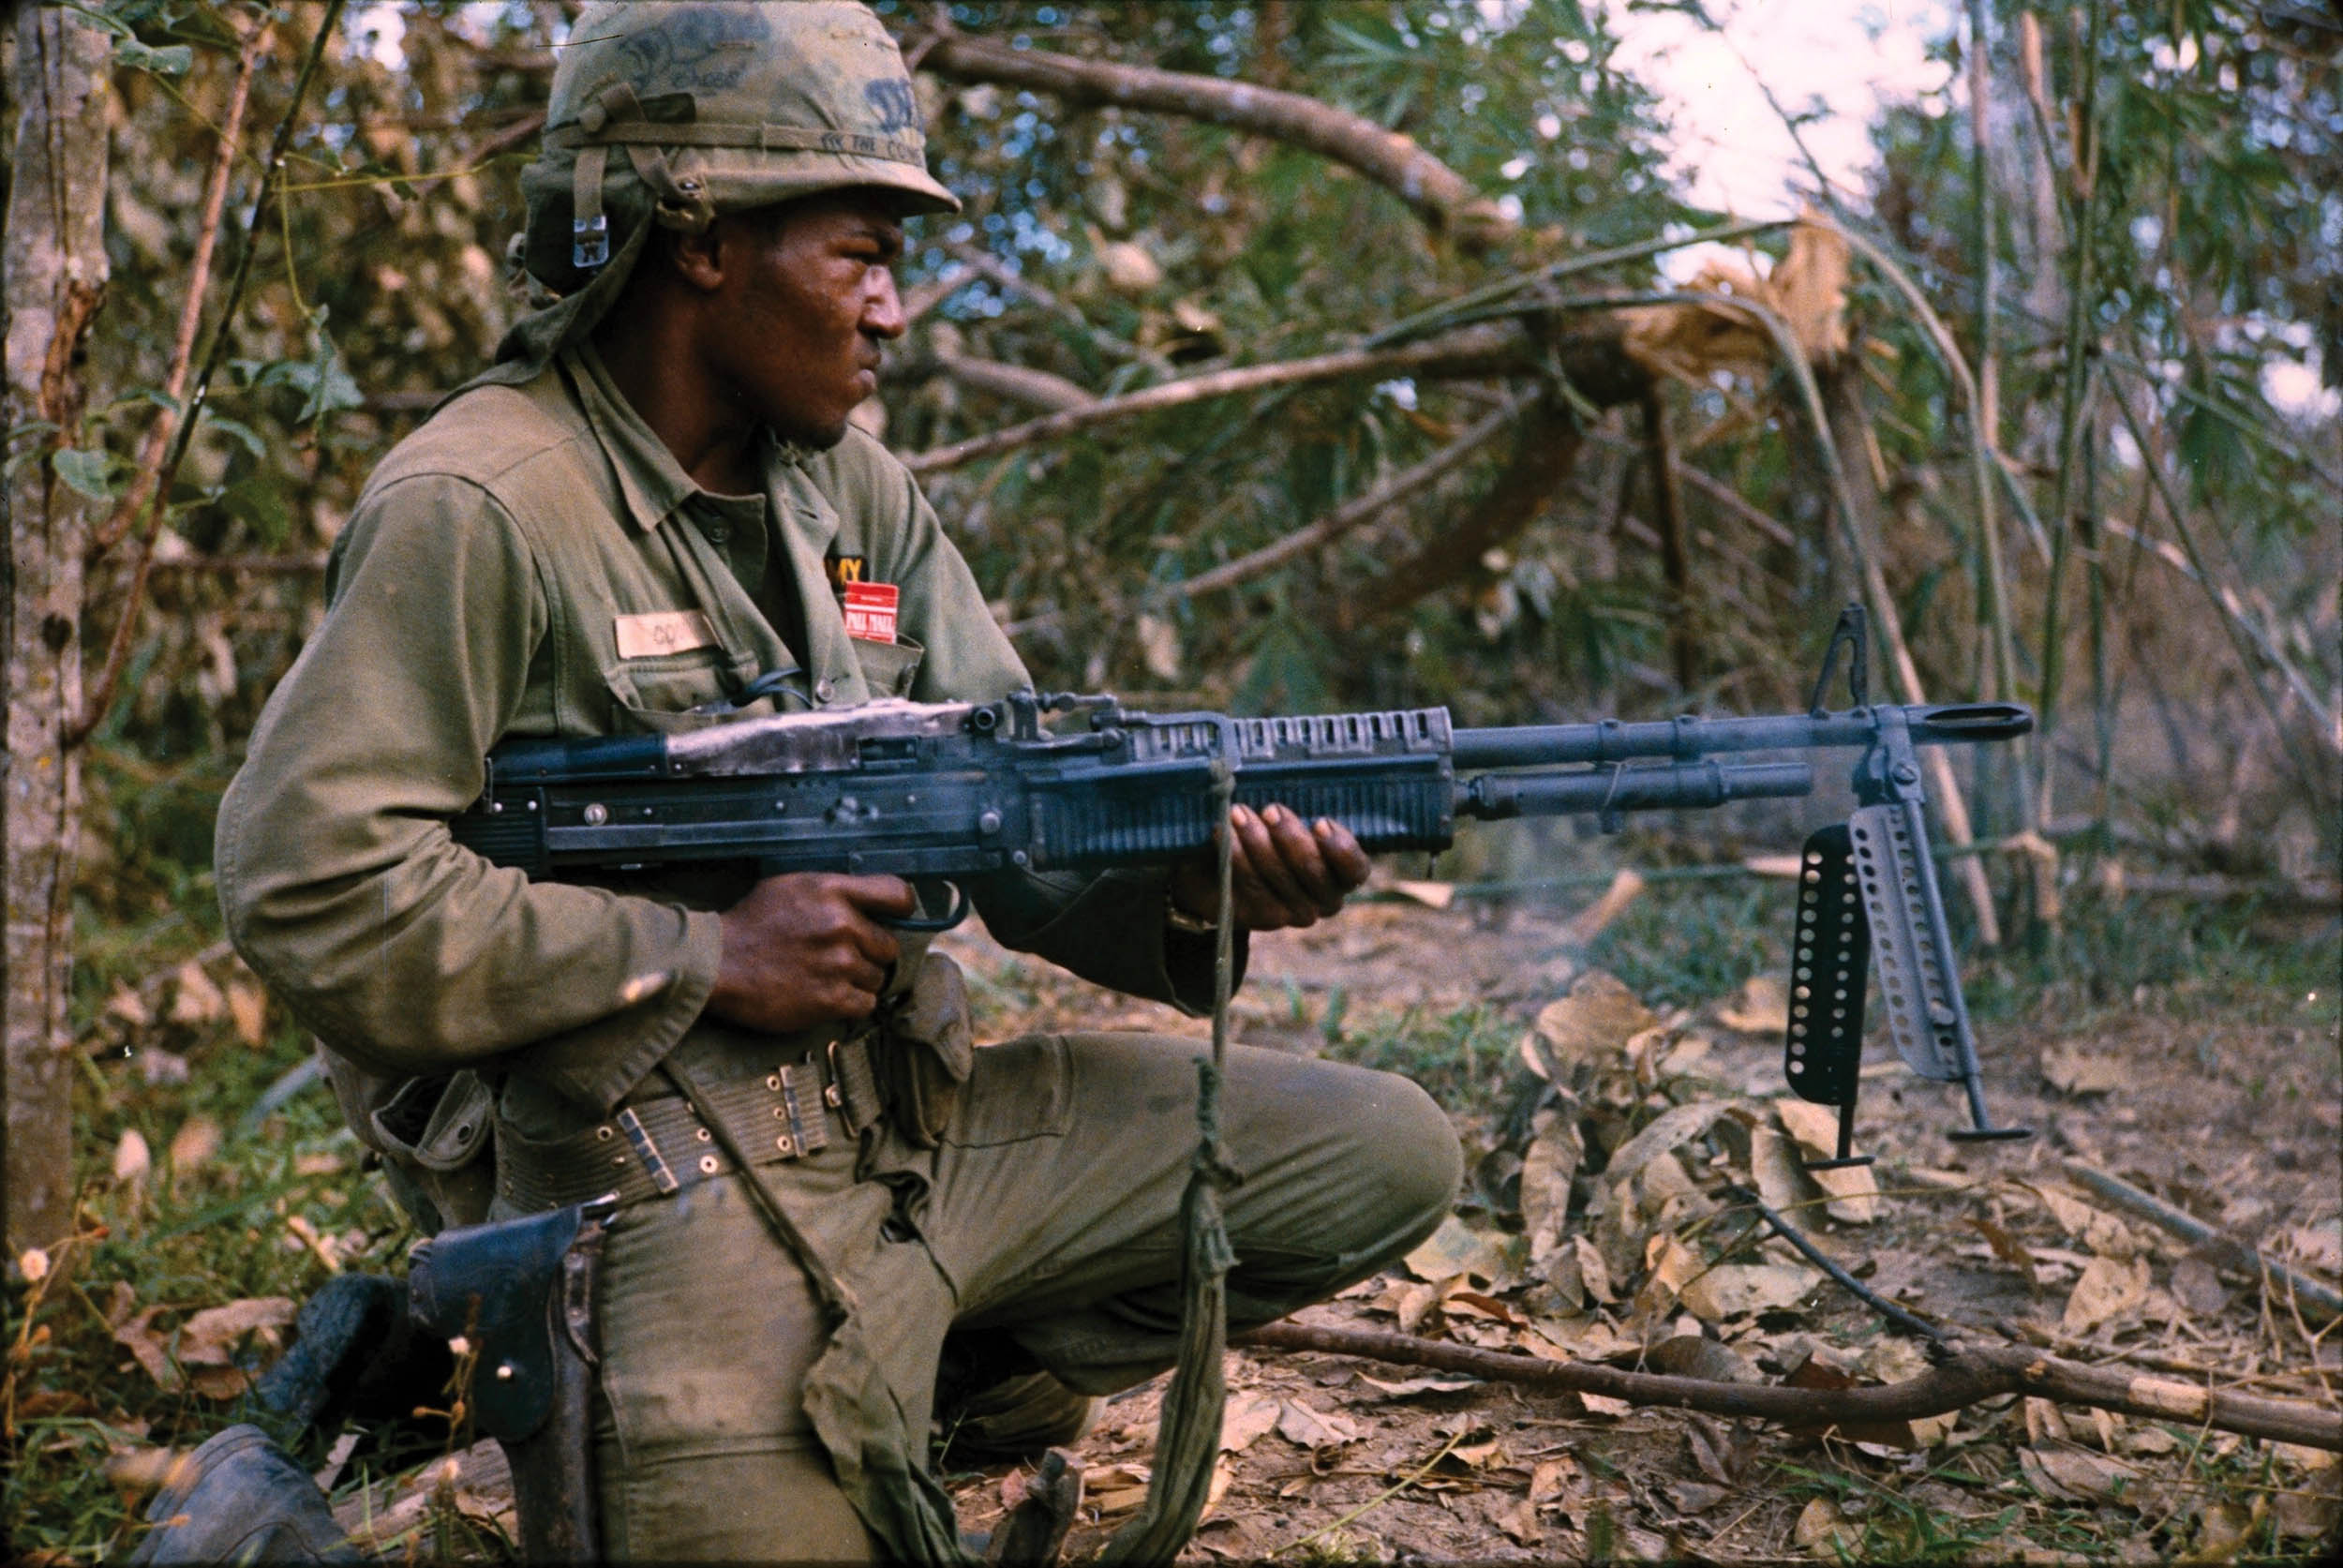 Private First Class Milton L. Cook, from Company C, 1st Battalion, 5th Mechanized Infantry, 25th Infantry Division, fires M60 machine gun while on search and destroy mission as part of Operation Cedar Falls, conducted in and around Filhol Plantation near Cu Chi, Republic of Vietnam, January 8, 1967 (U.S. National Archives and Records Administration)